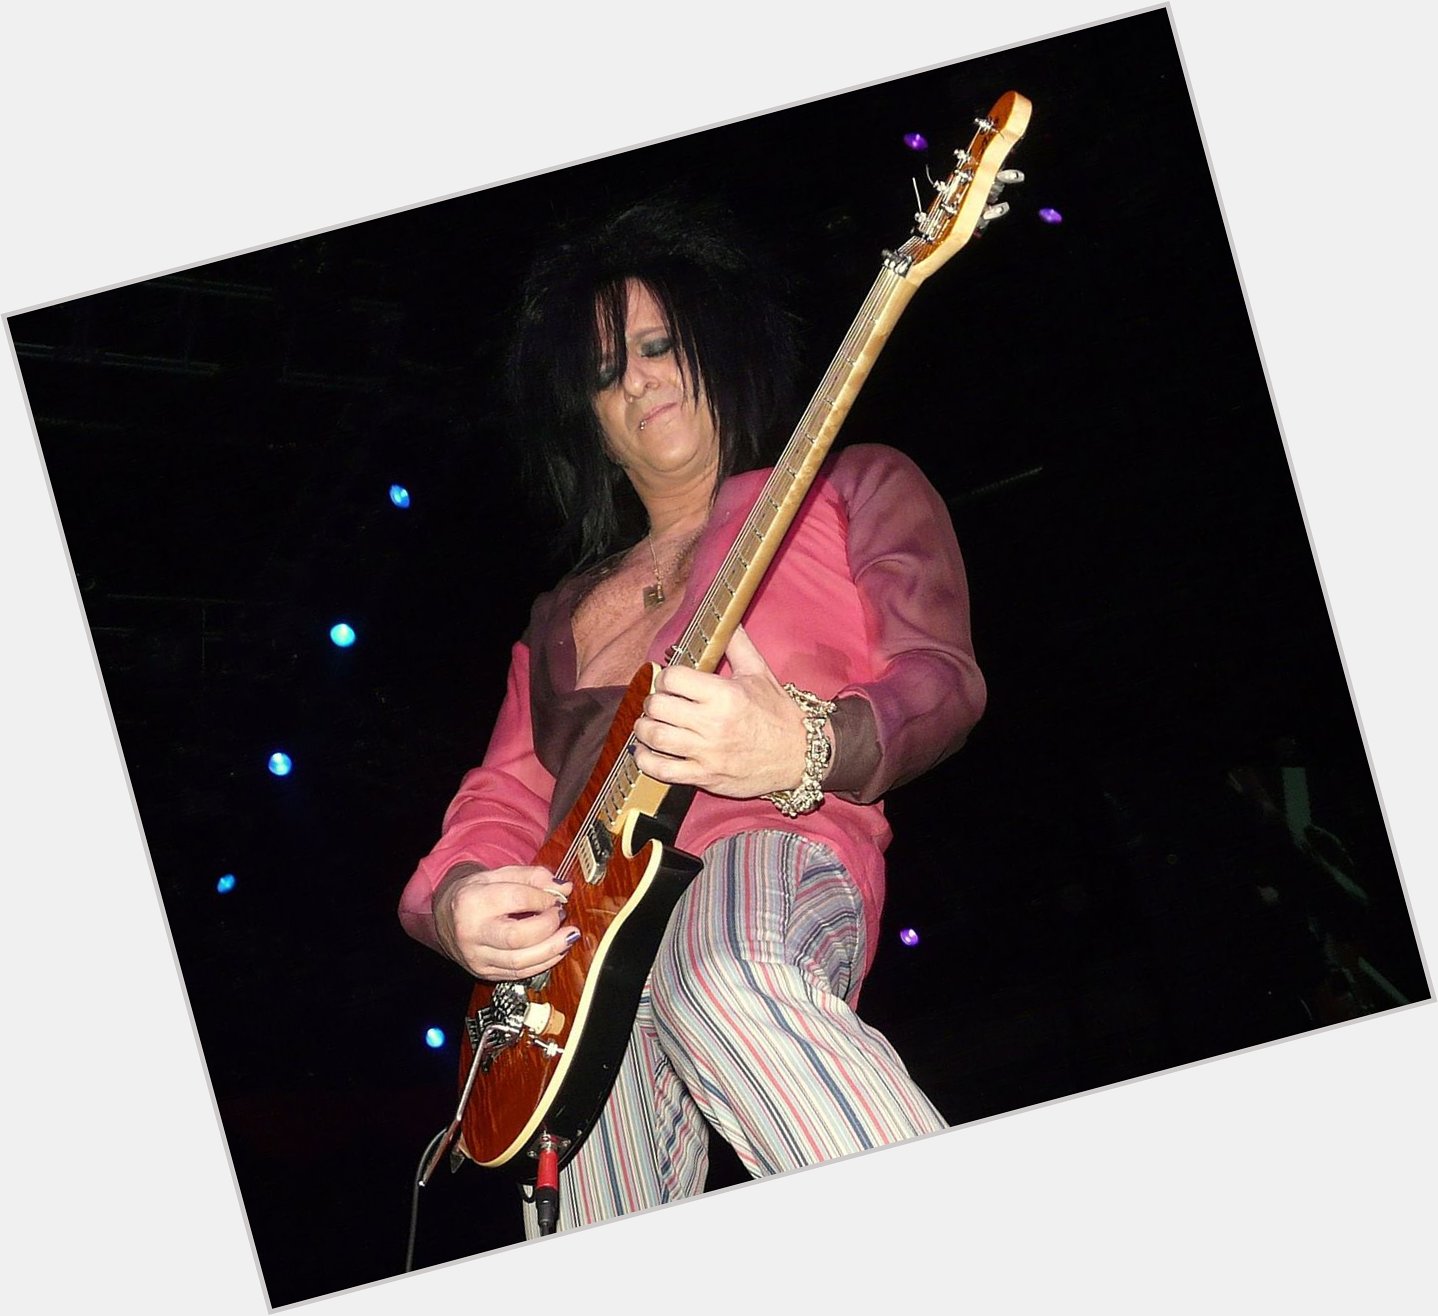 And a happy birthday to the great Steve Stevens!!! 